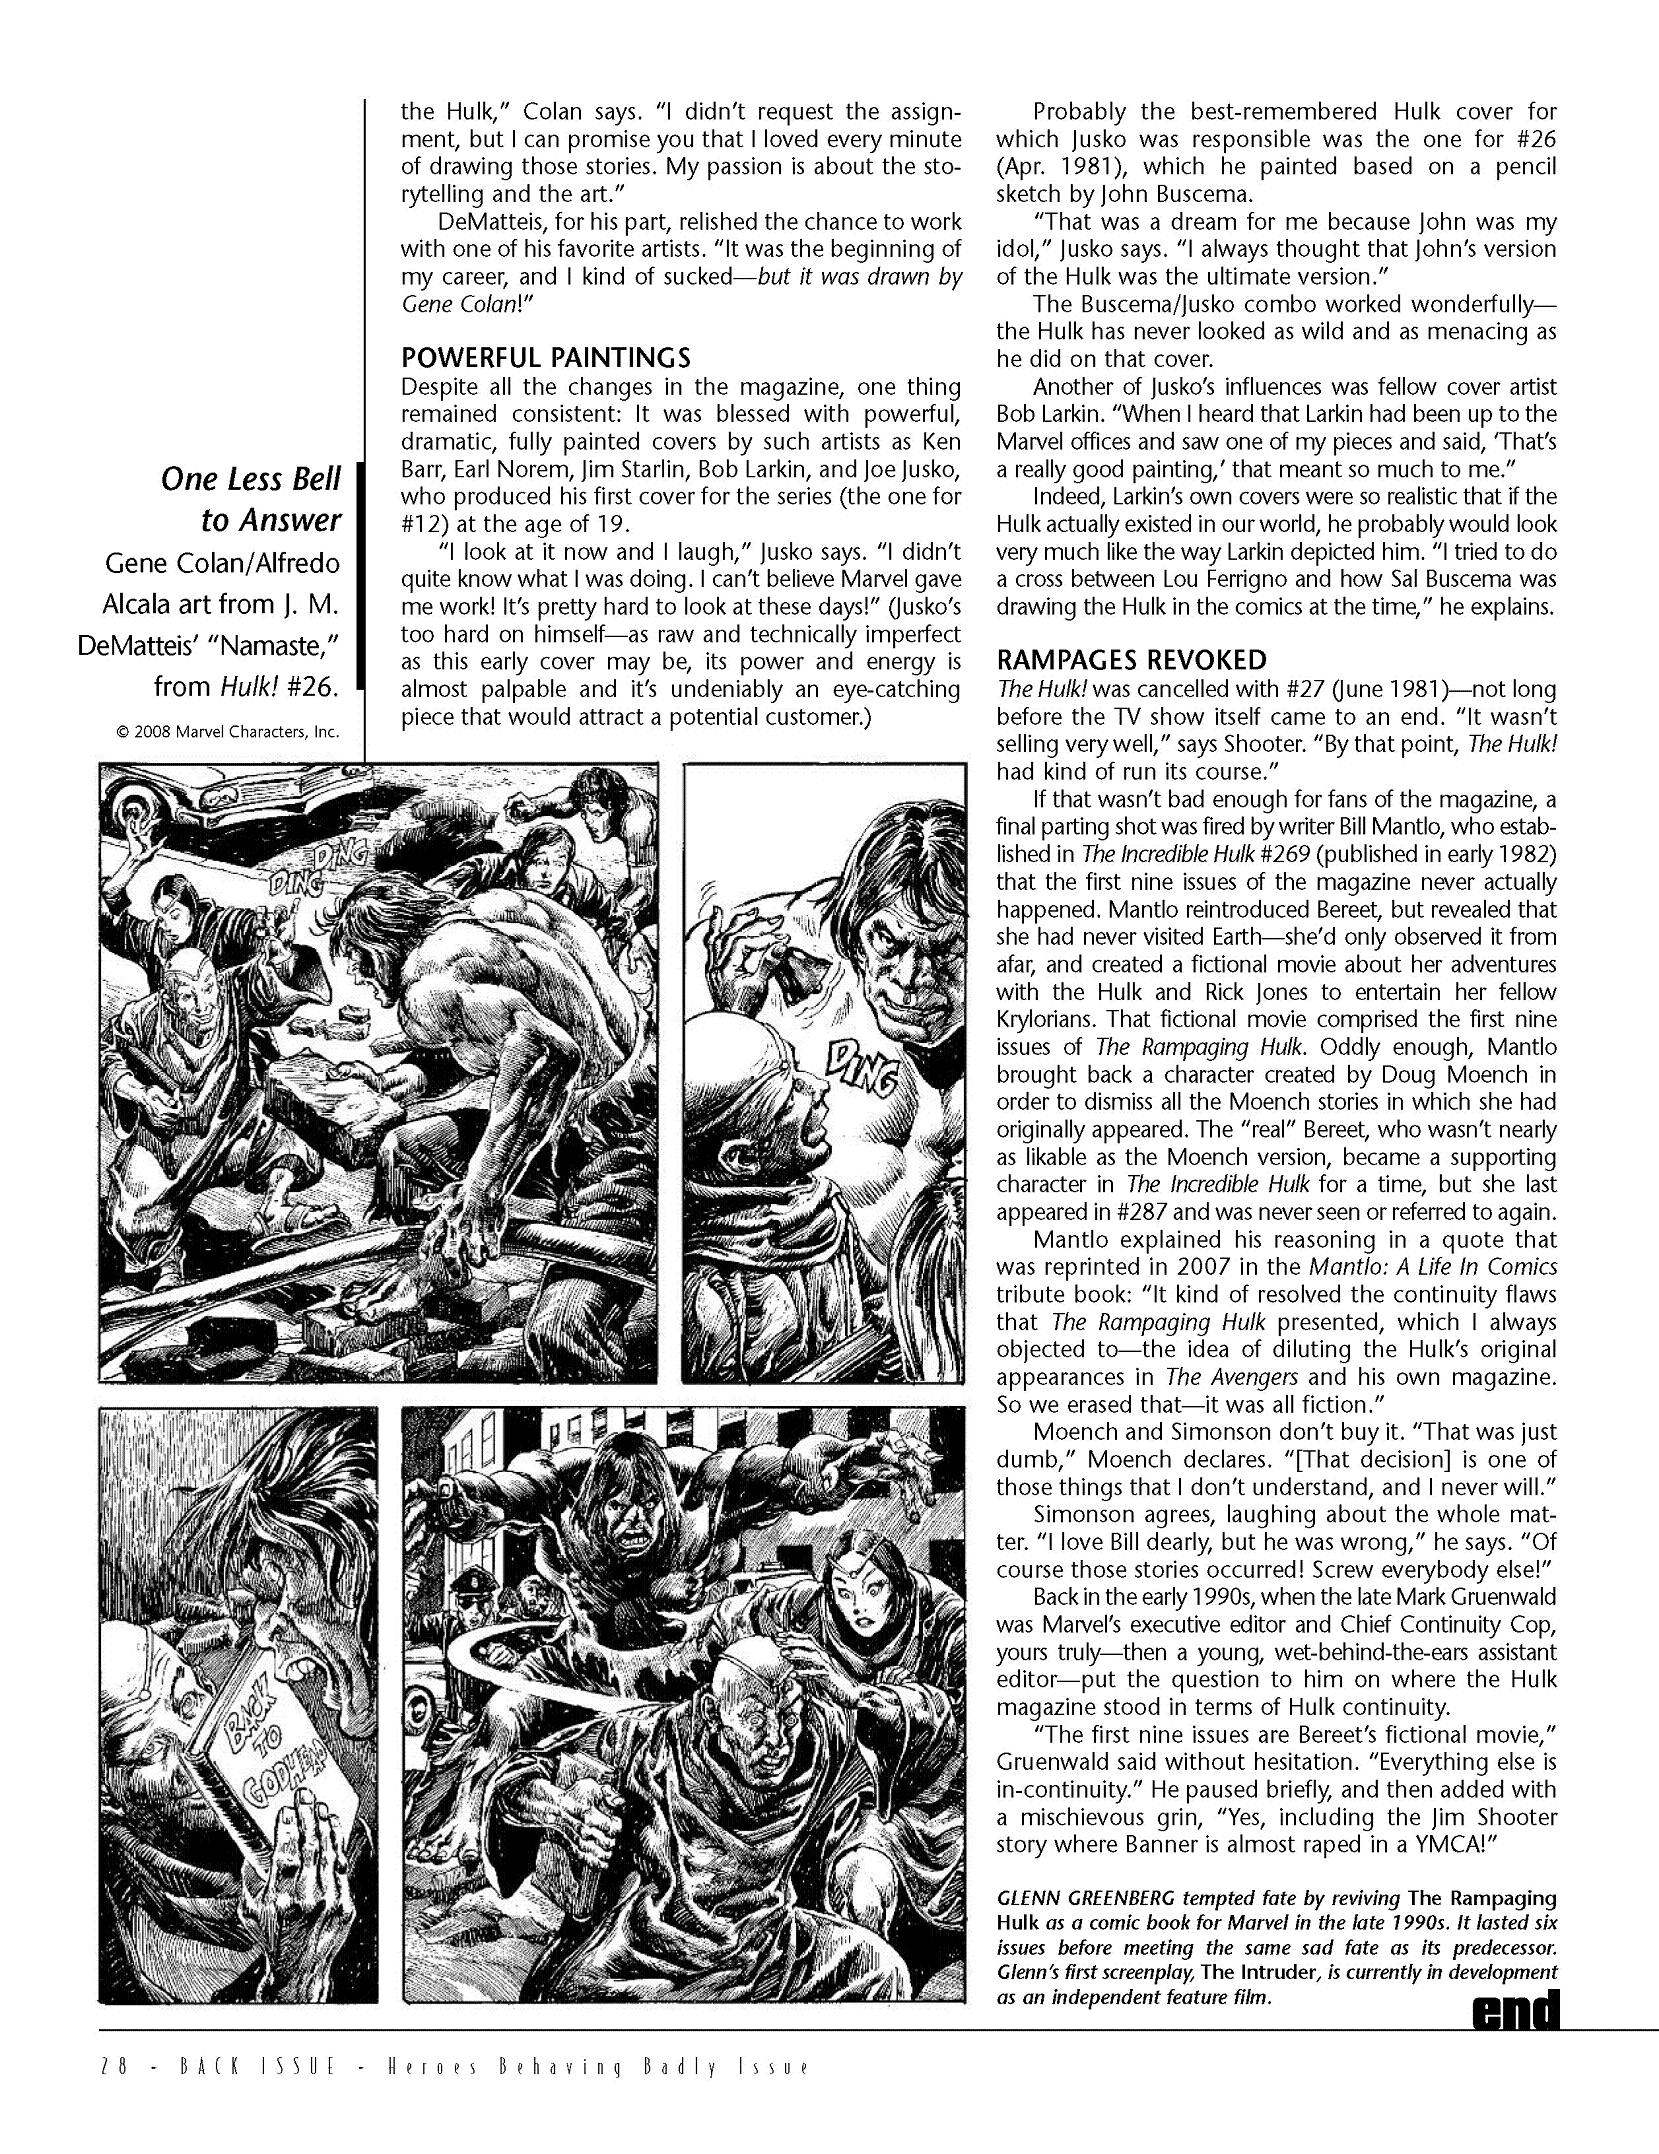 Read online Back Issue comic -  Issue #28 - 28